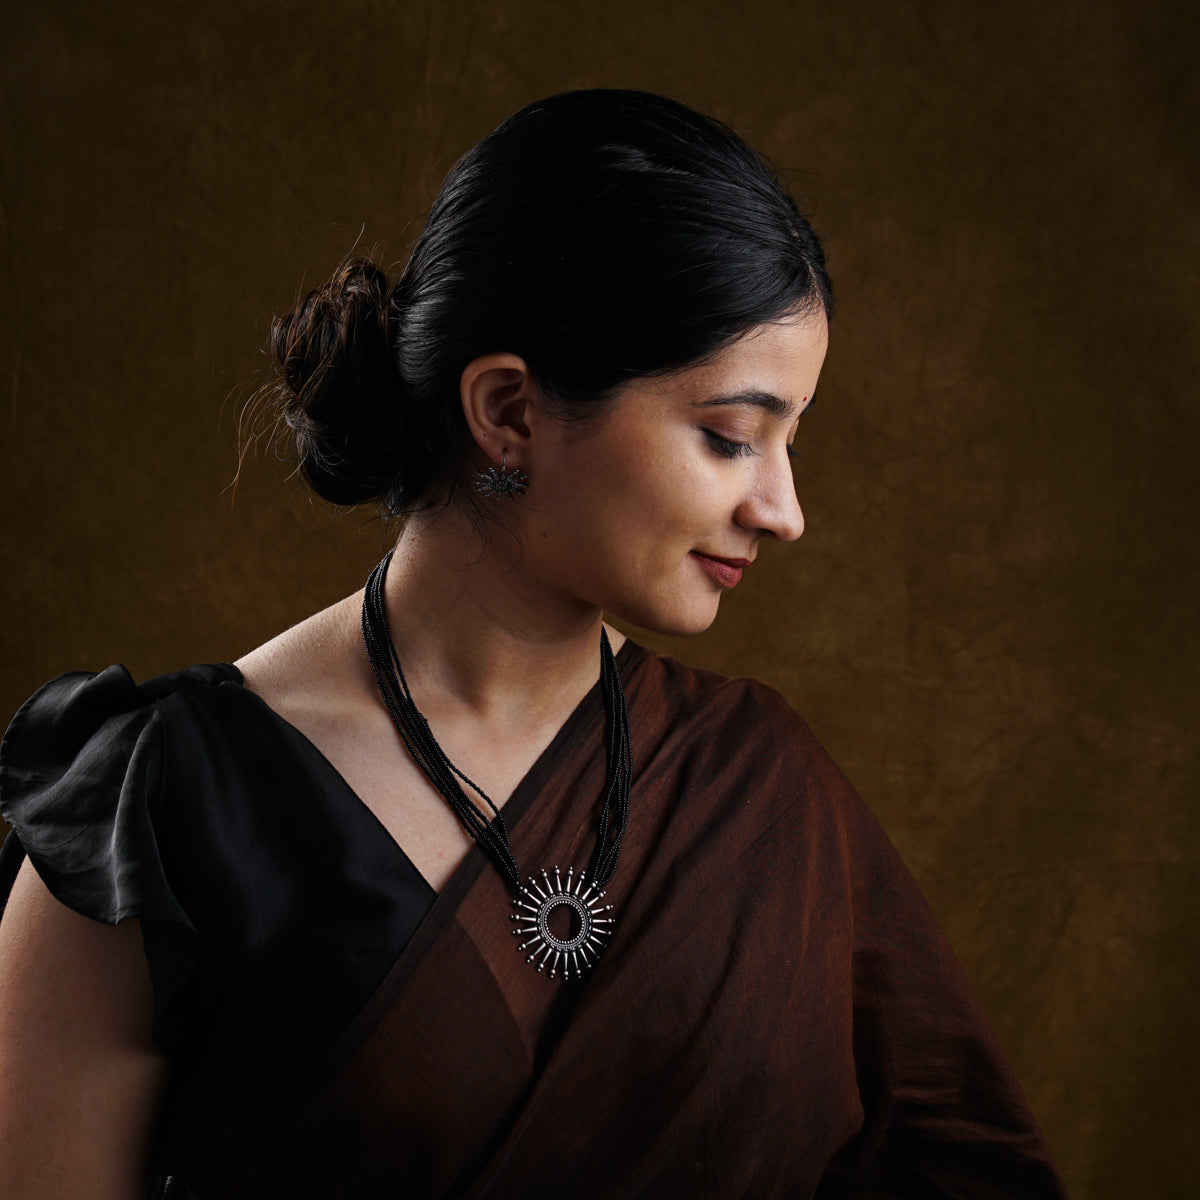 a woman wearing a necklace and a brown dress